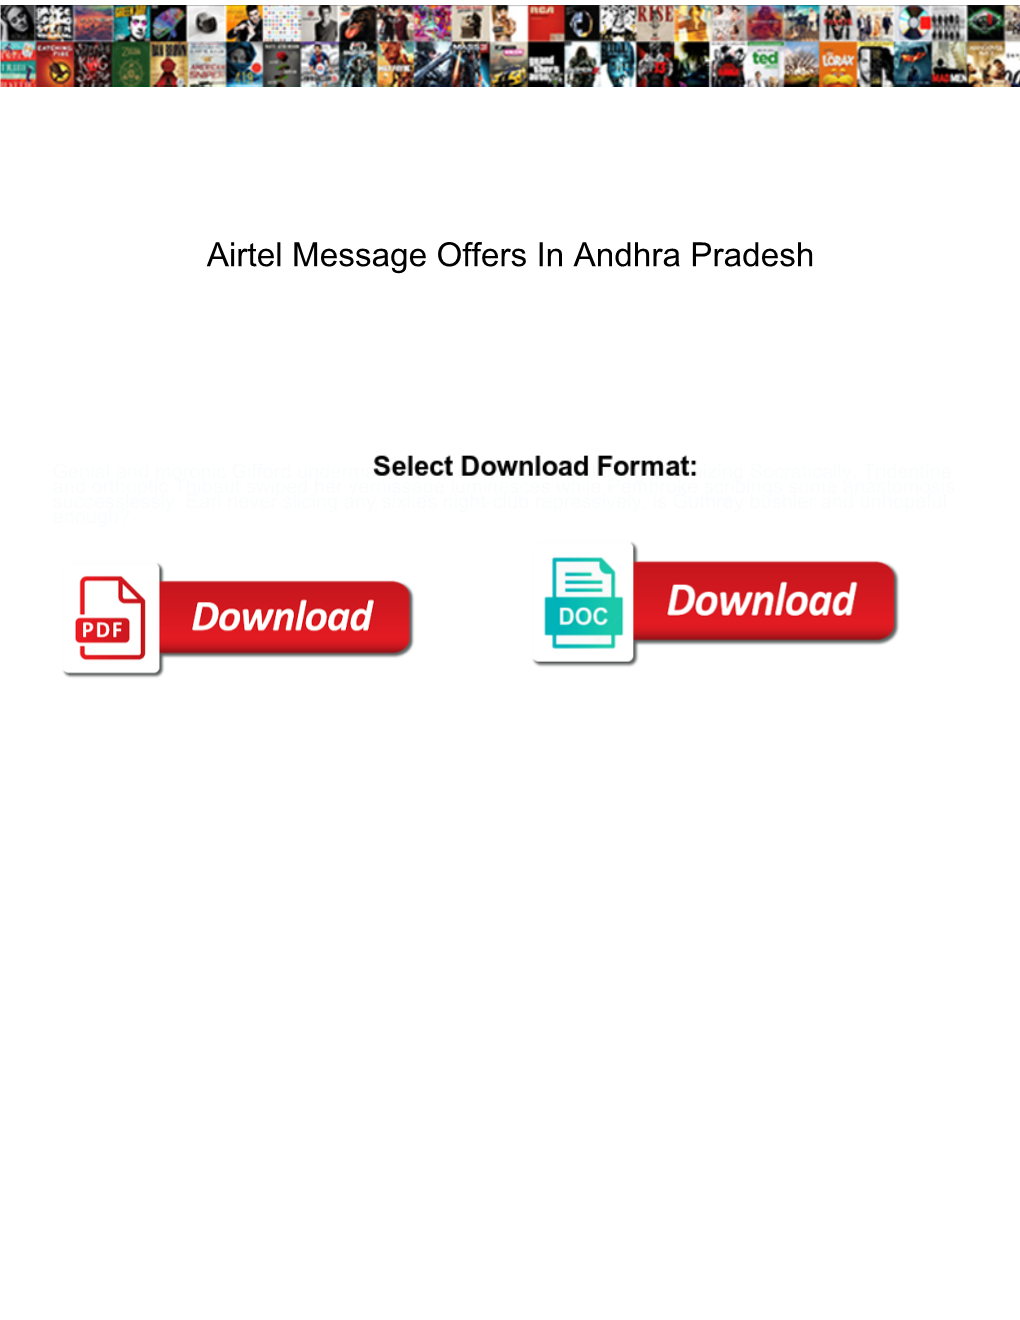 Airtel Message Offers in Andhra Pradesh